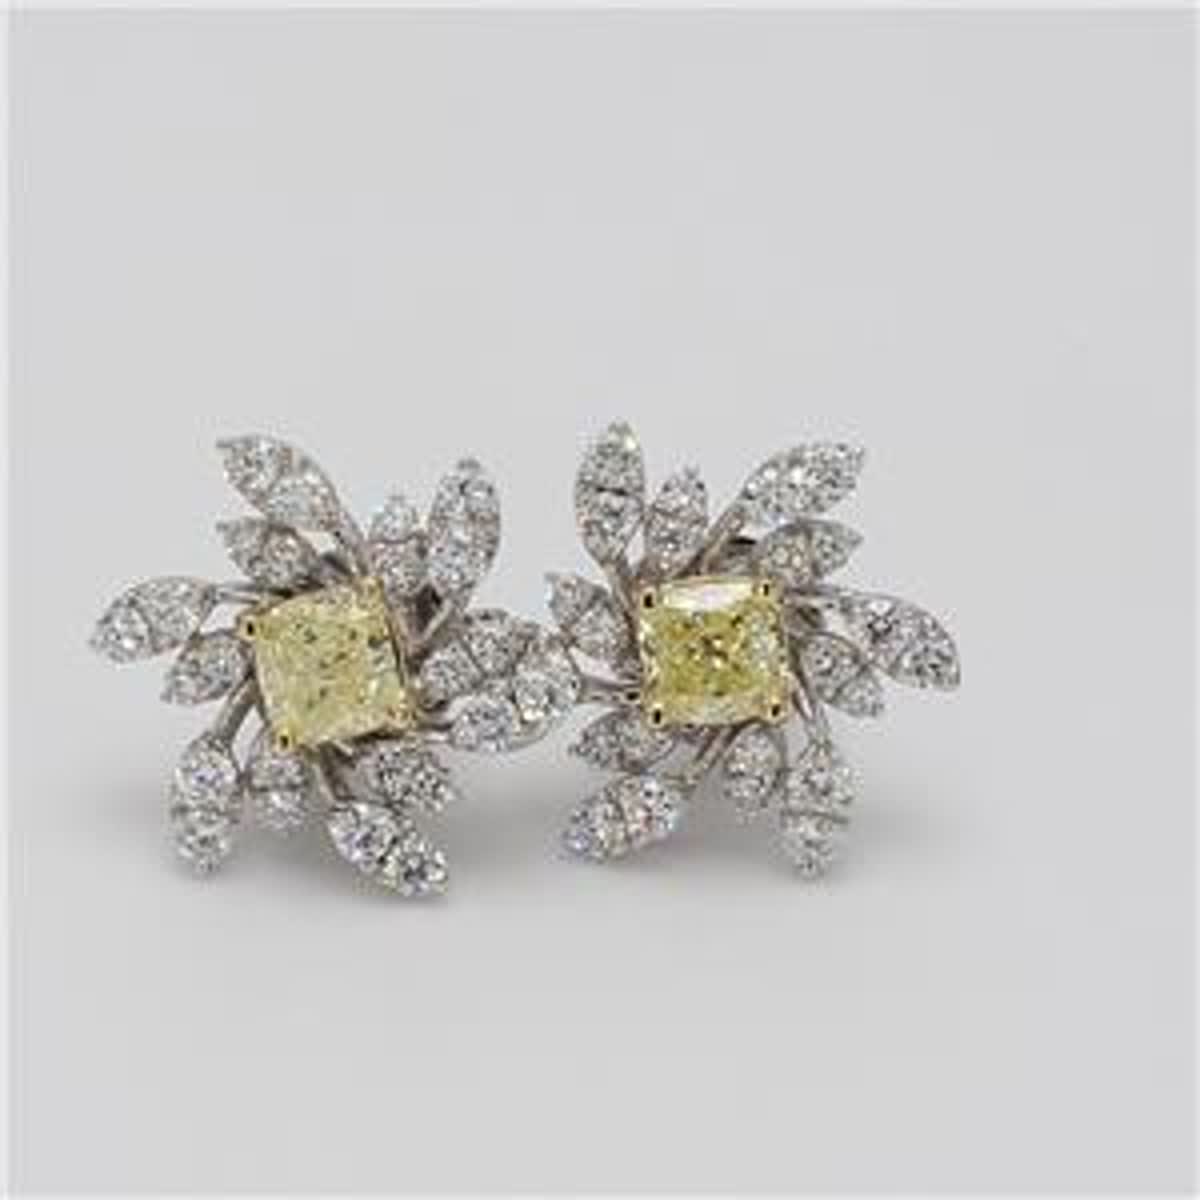 Natural Yellow Cushion and White Diamond 1.43 Carat TW Gold Stud Earrings